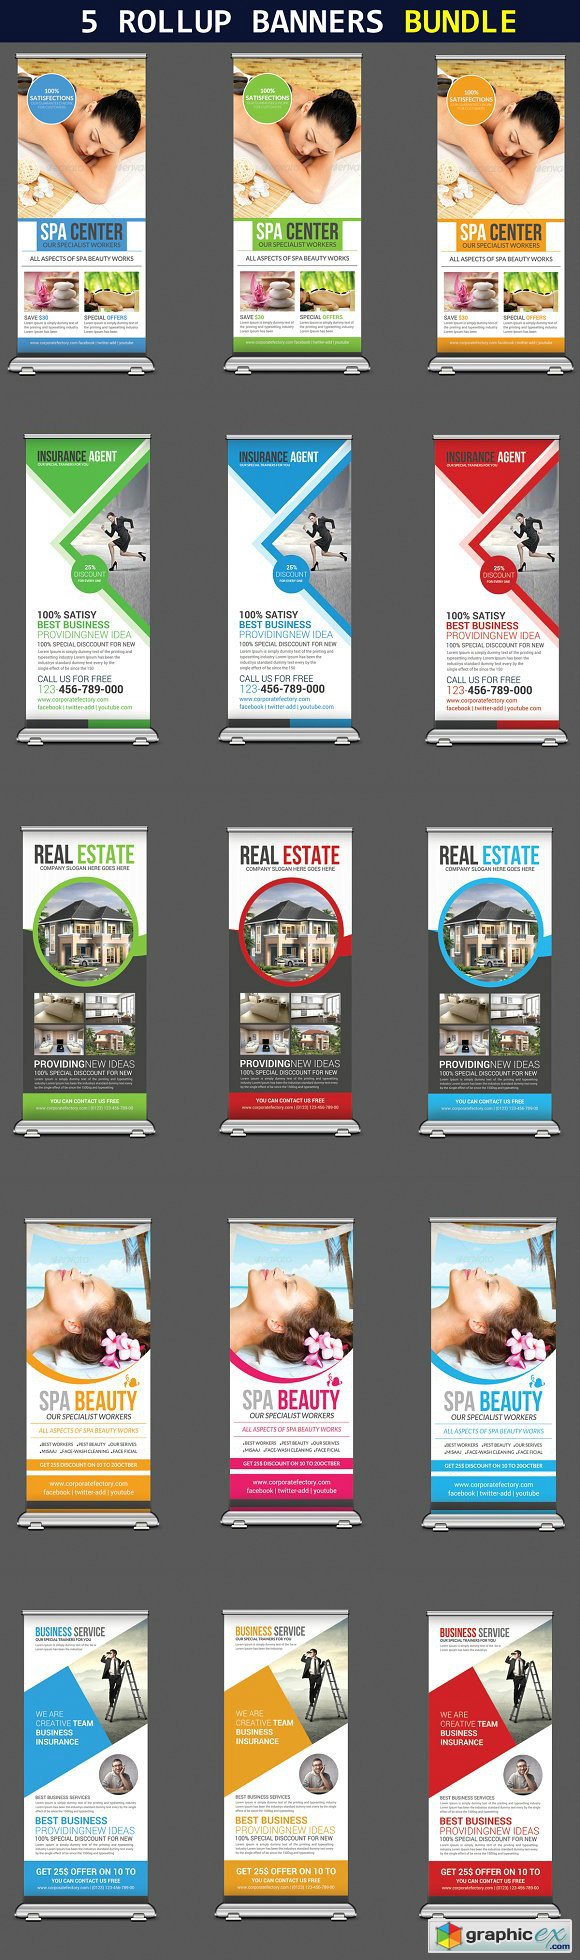 5 Multipurpose Rollup Banners Bundle